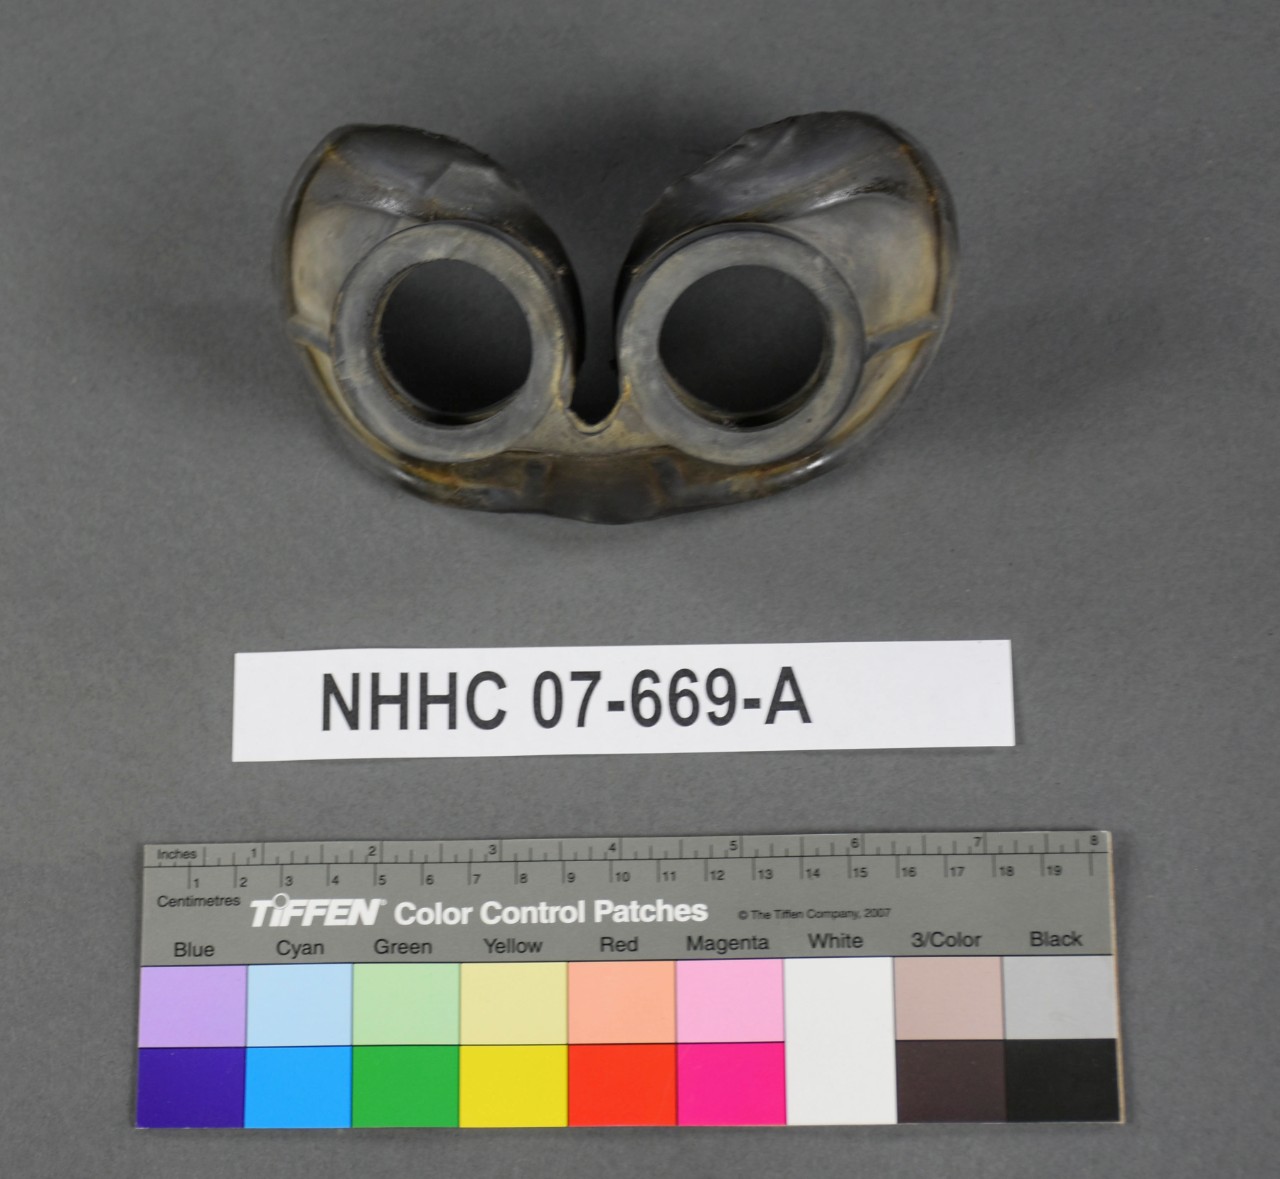 Rubber eye piece reverese attaches to Japanese Binoculars at Battle of Leyte Gulf